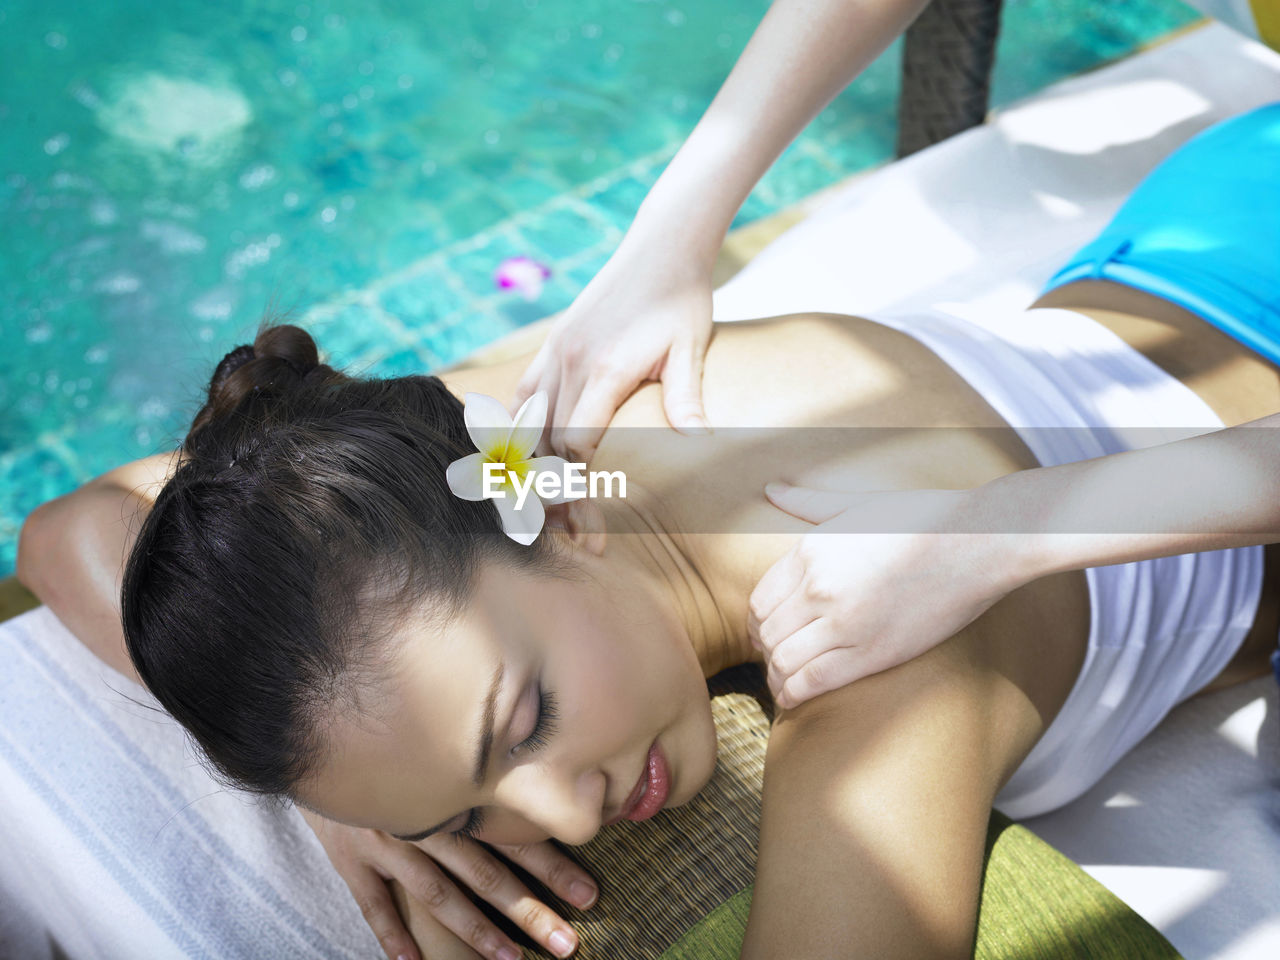 Cropped hands of woman massaging customer at poolside